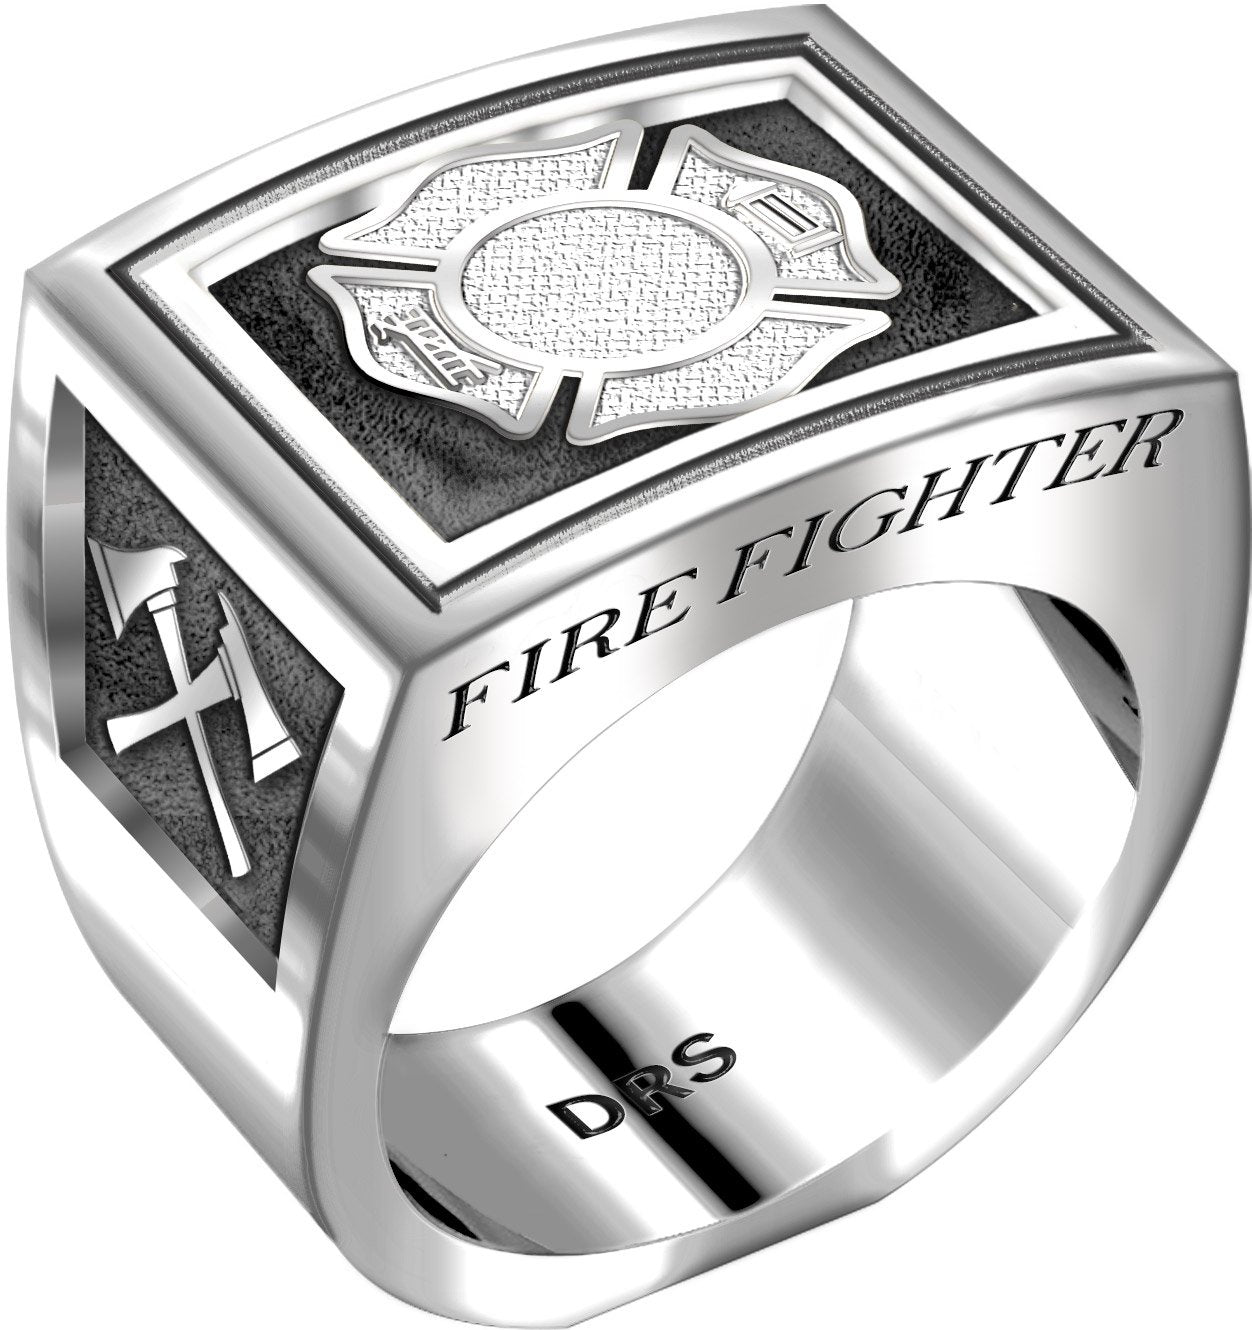 Men's Heavy 0.925 Sterling Silver Firefighter Ring Band